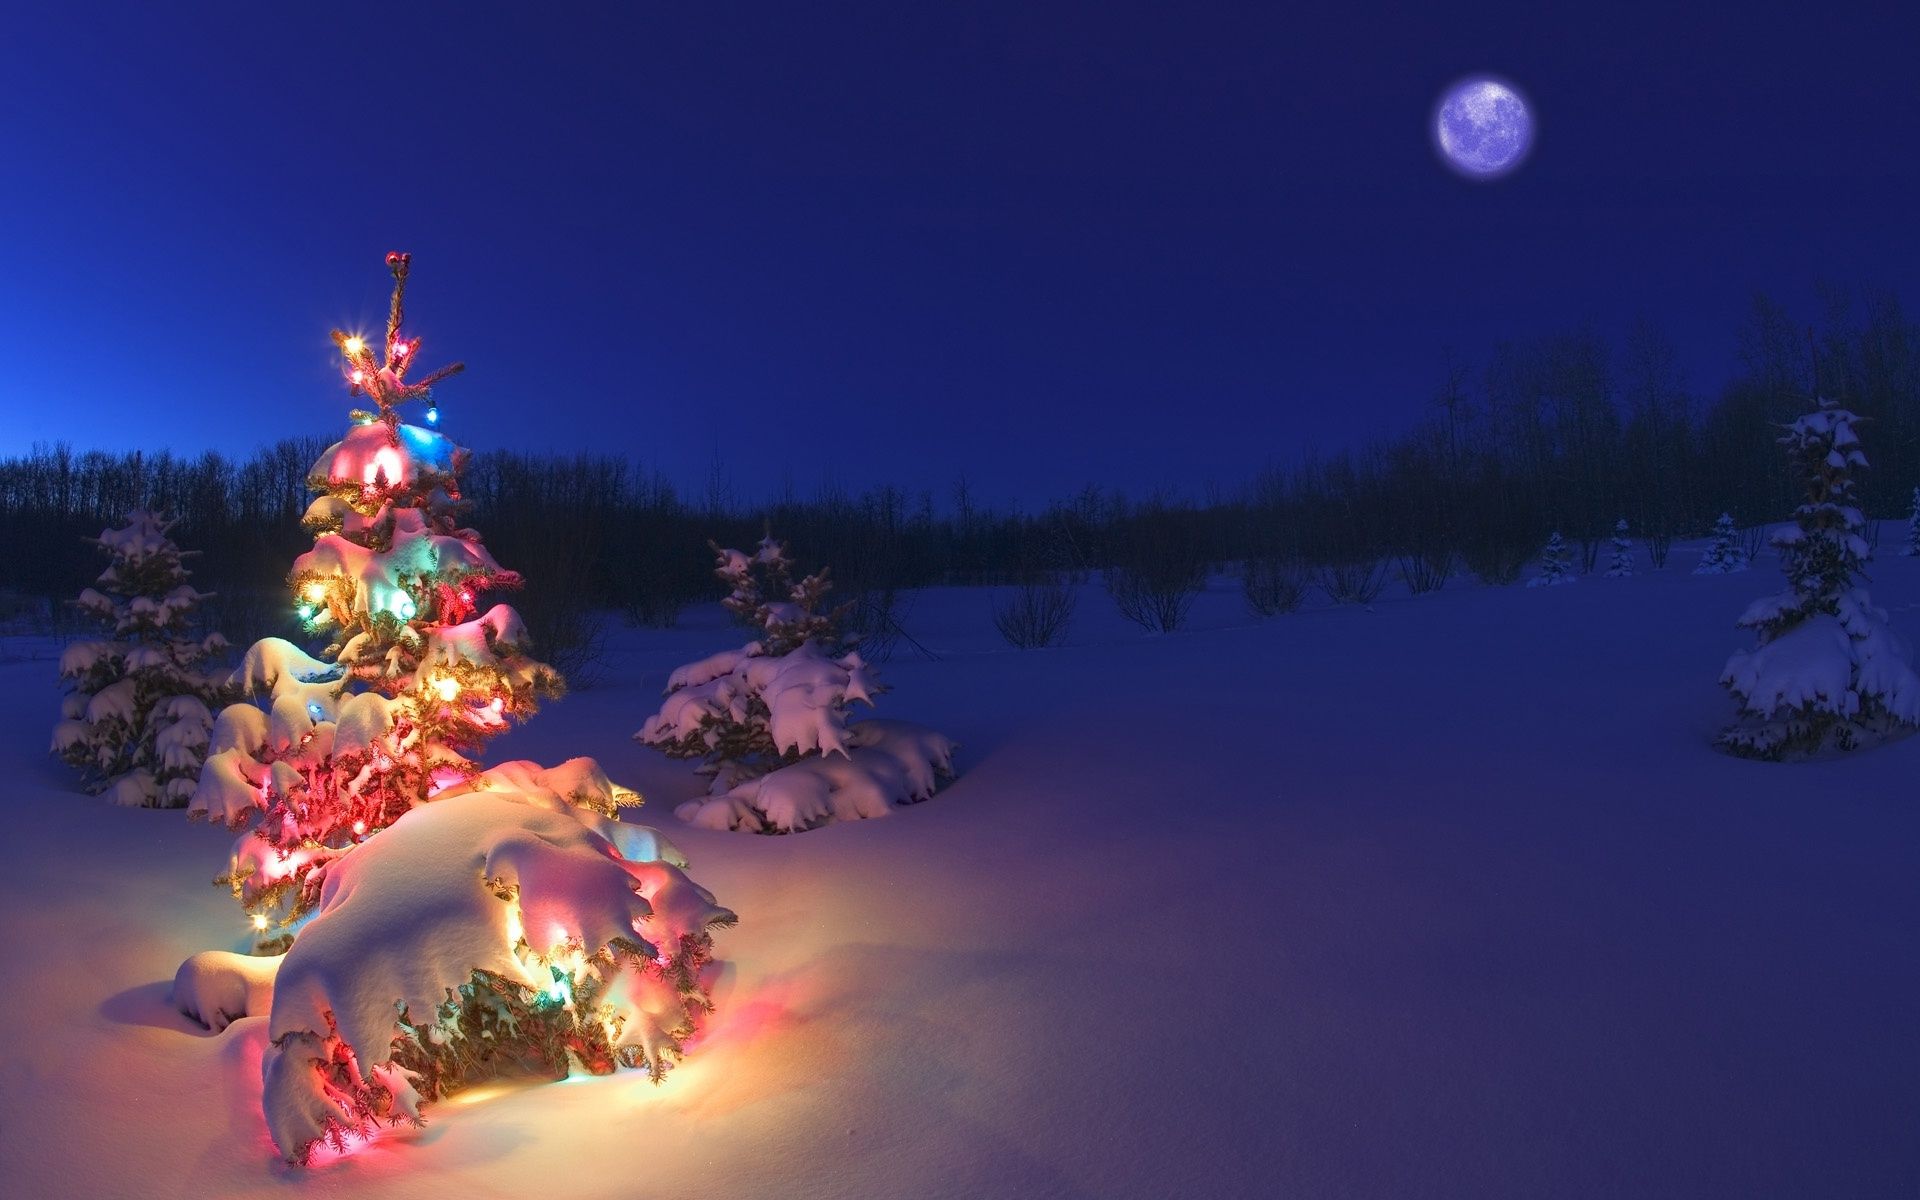 Christmas Wallpaper Archives - Wallpapers Counter